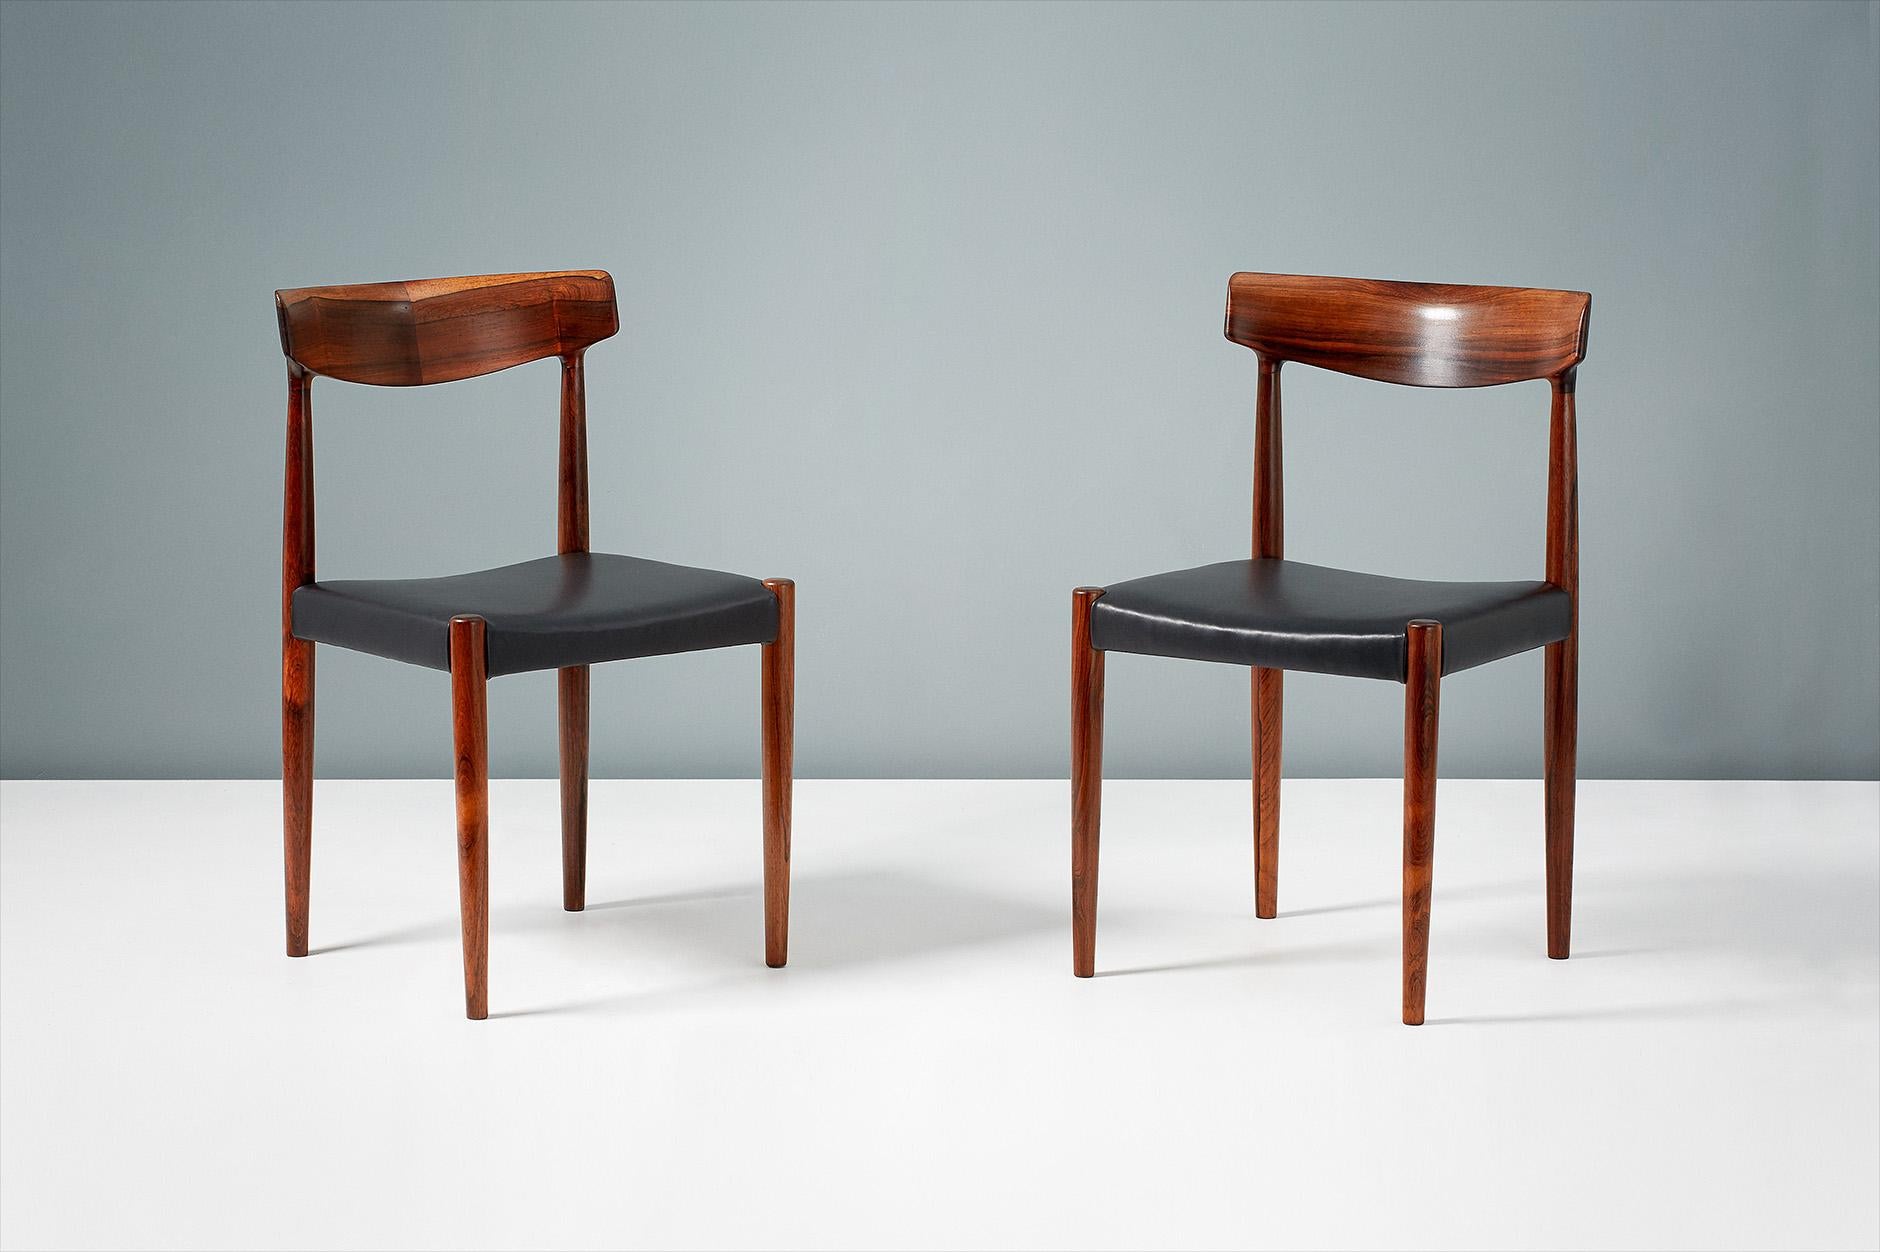 Scandinavian Modern Knud Faerch Set of 8 Model 343 Dining Chairs, Rosewood and Leather